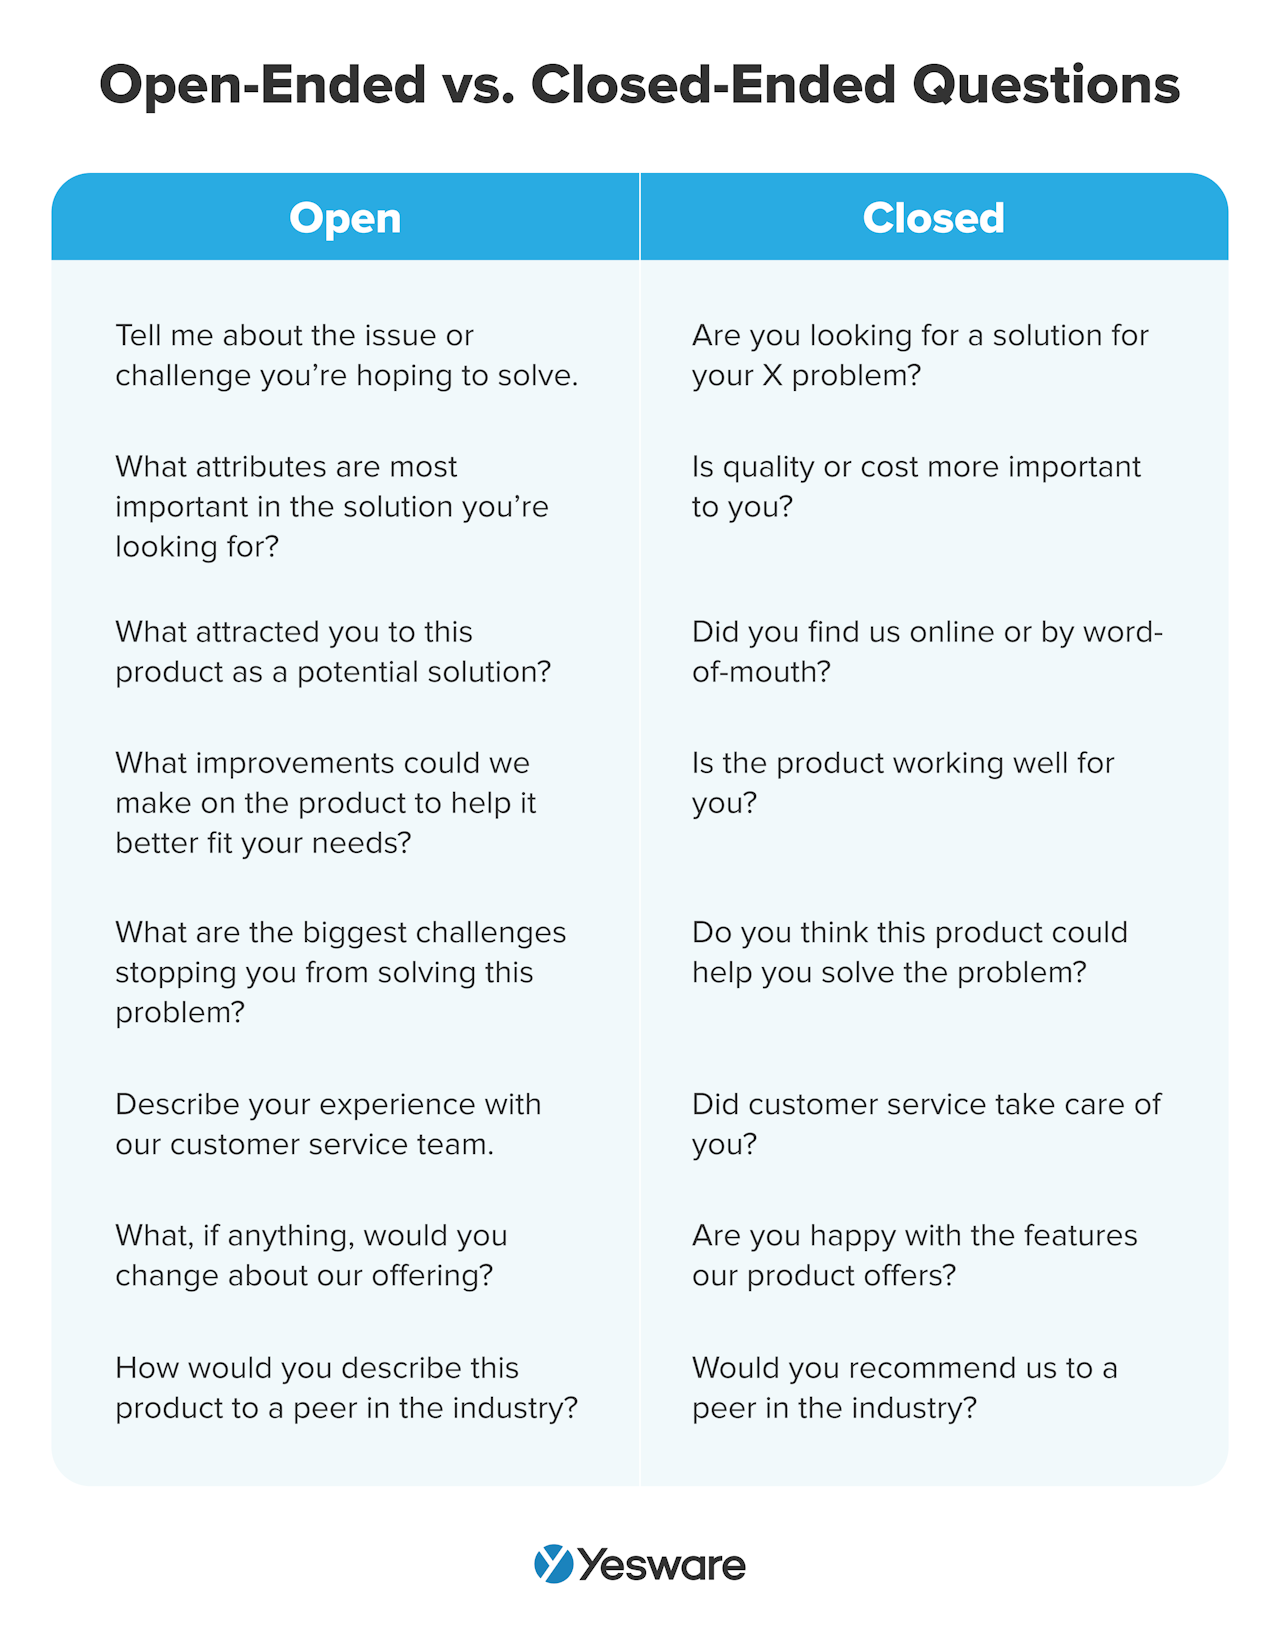 mirroring in sales best practices: open-ended vs. closed-ended questions